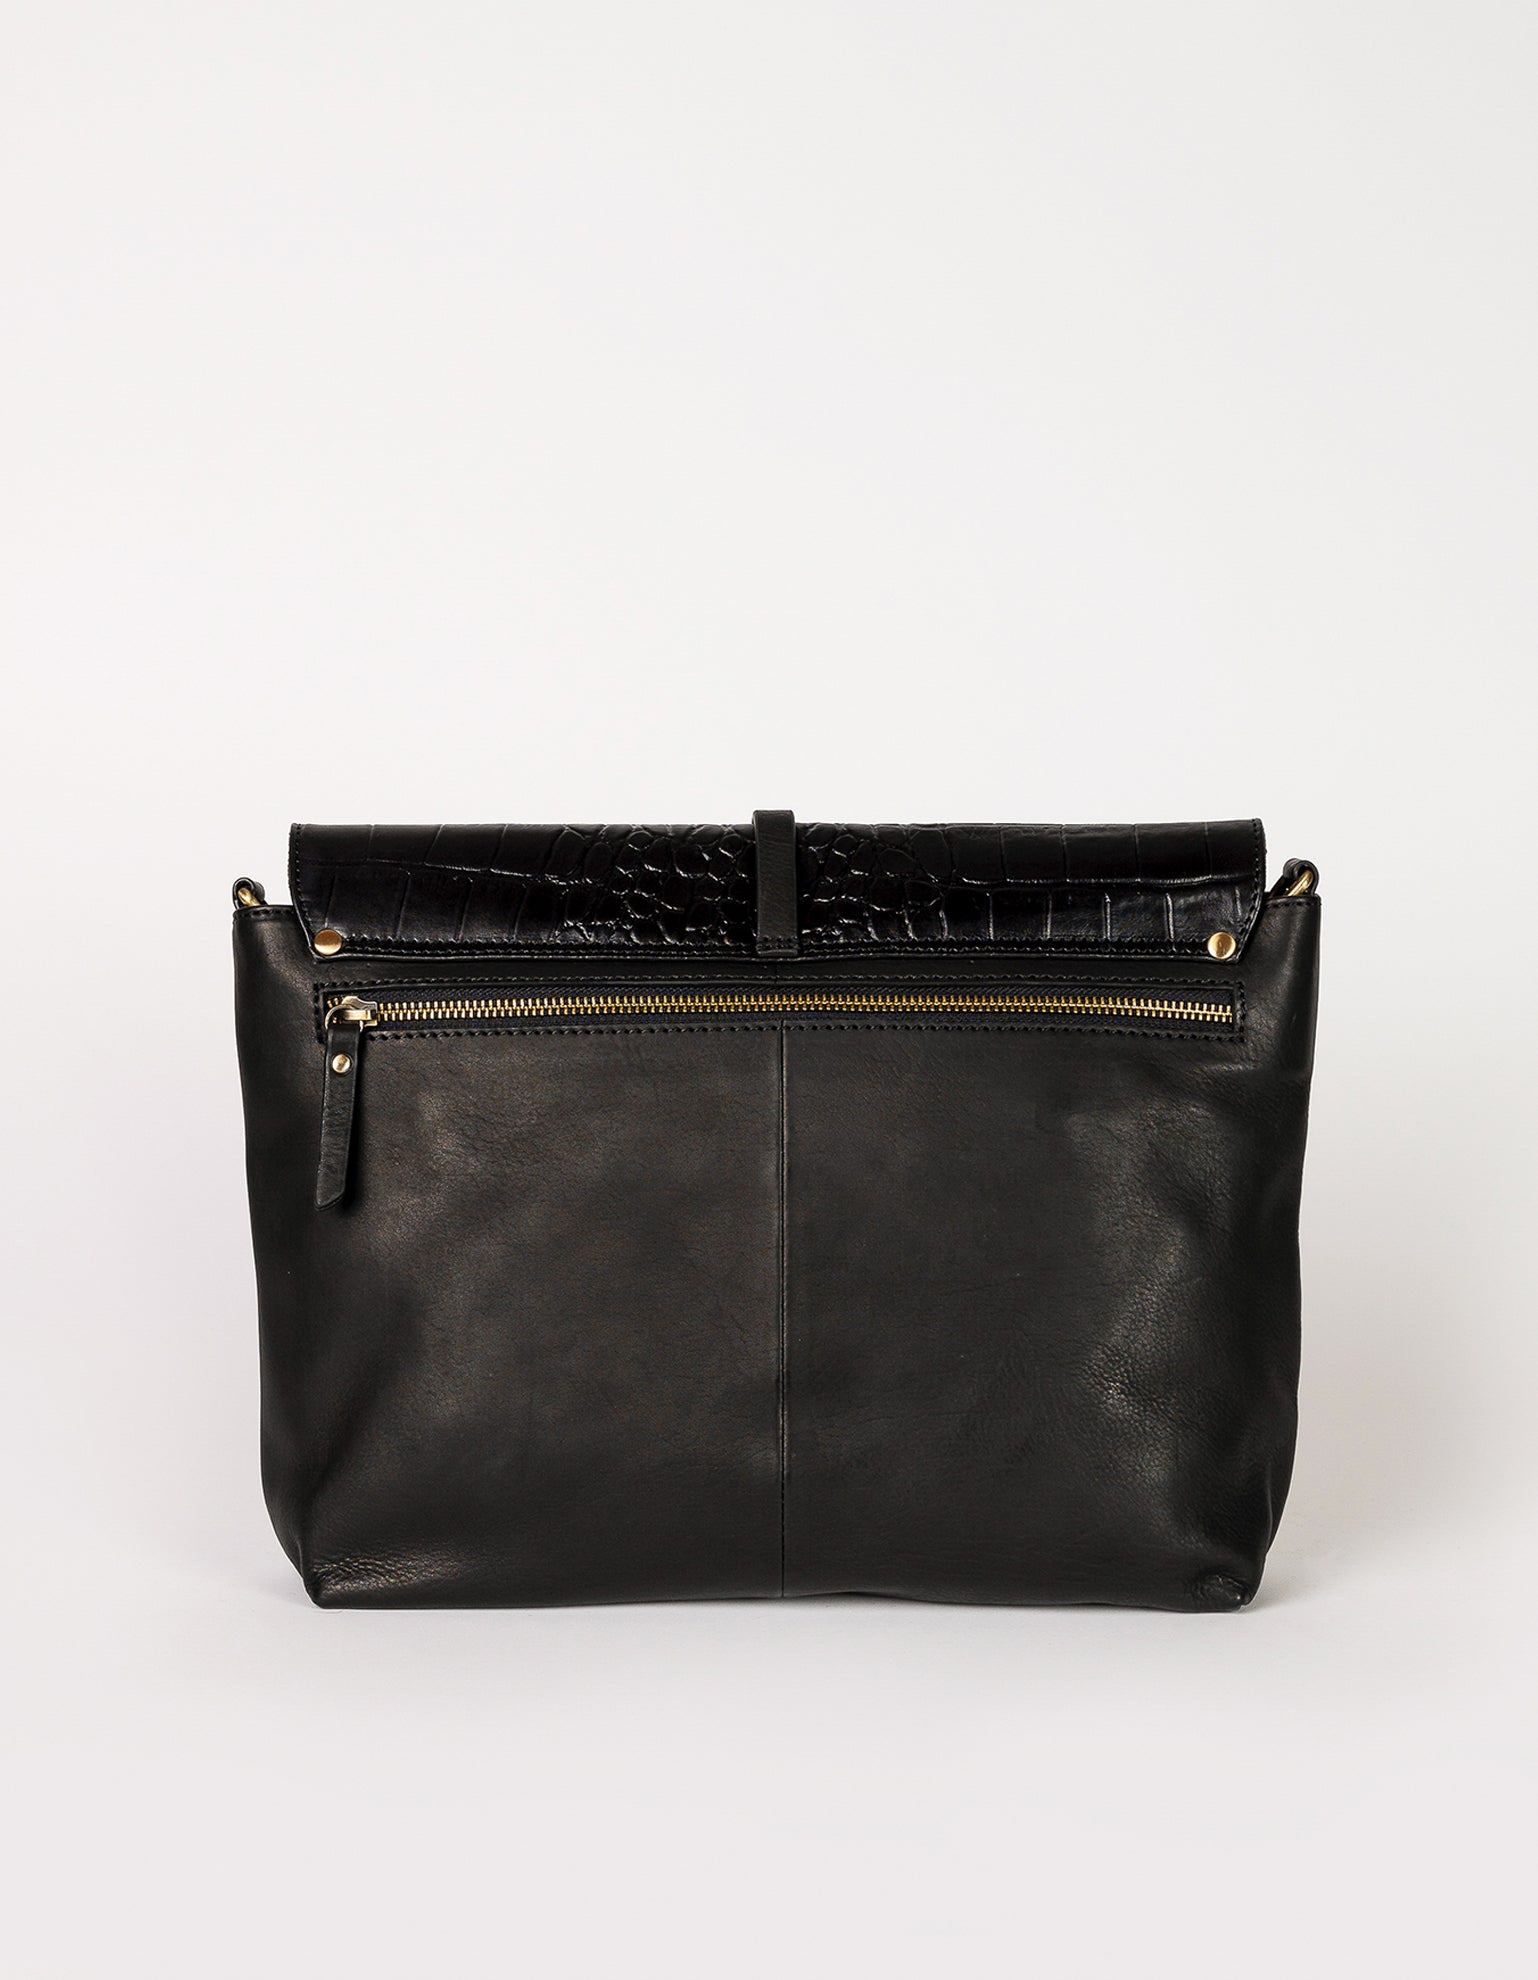 Black Classic Croco leather womens handbag. Square shape with an adjustable strap. Back product image.